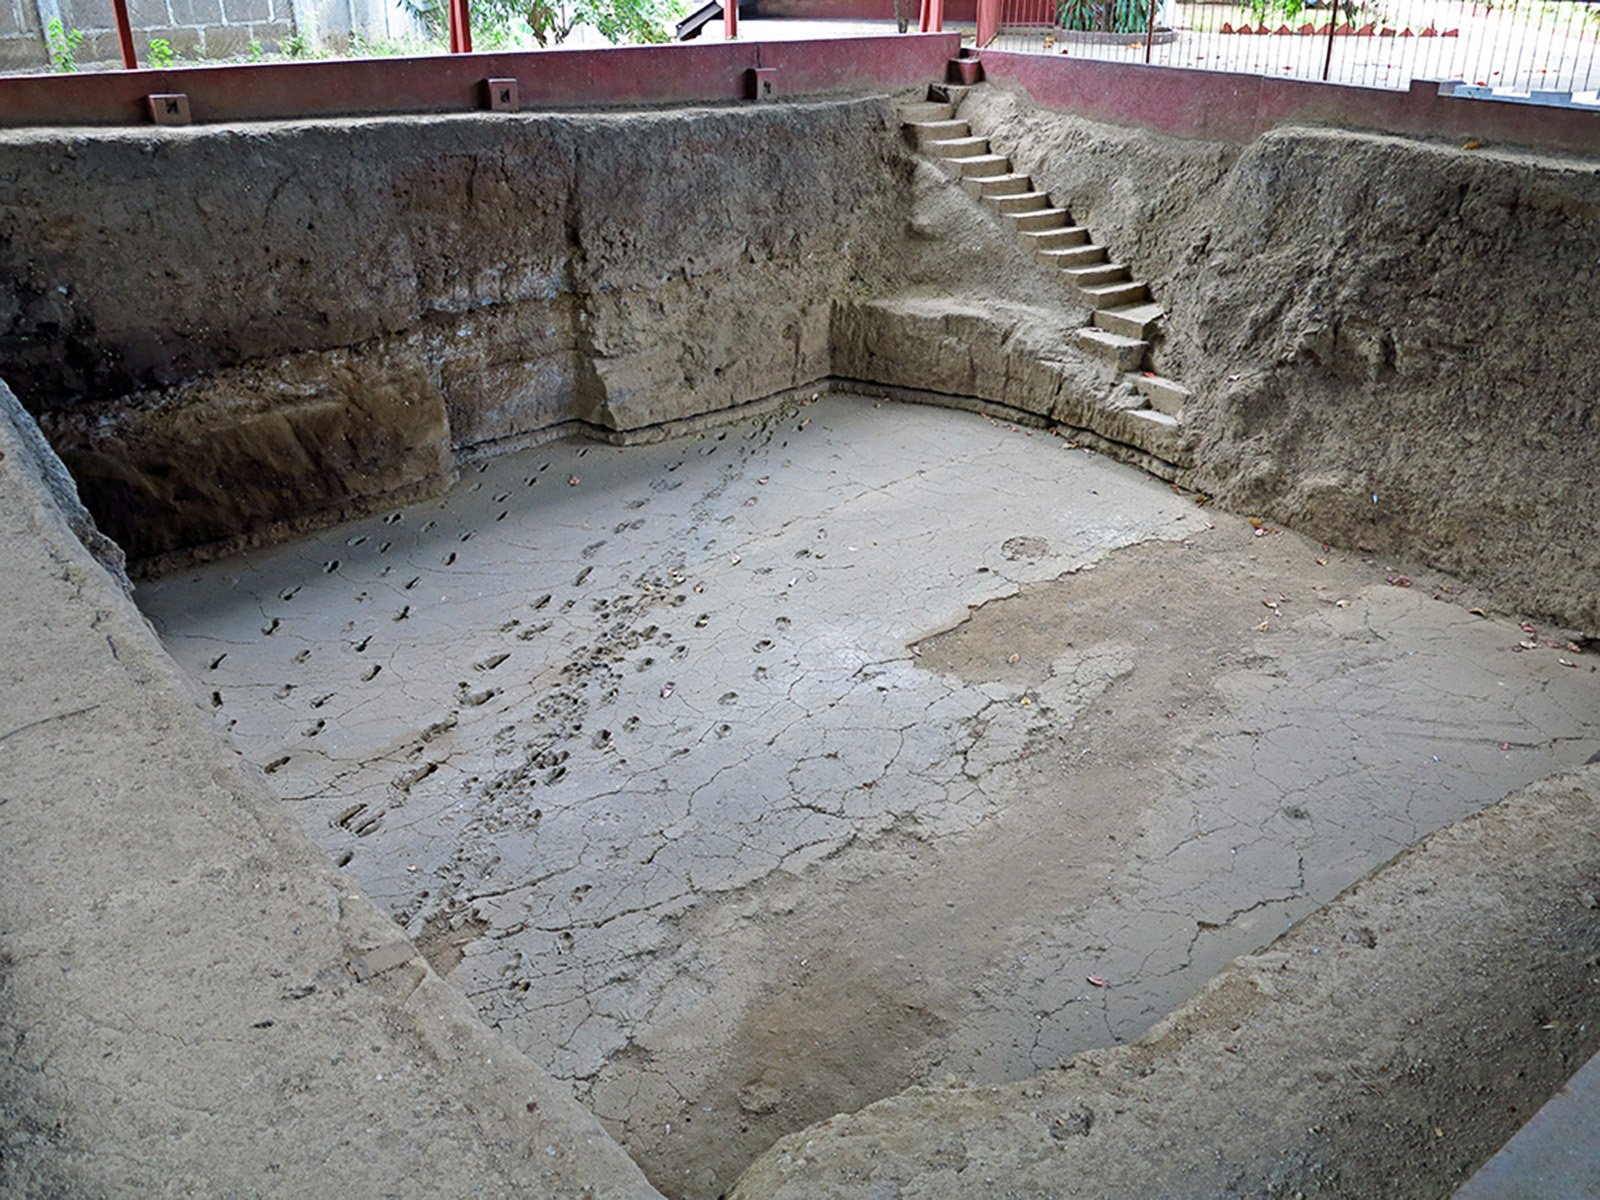 How to visit museum "Ancient footprints of Acahualinca" in Managua